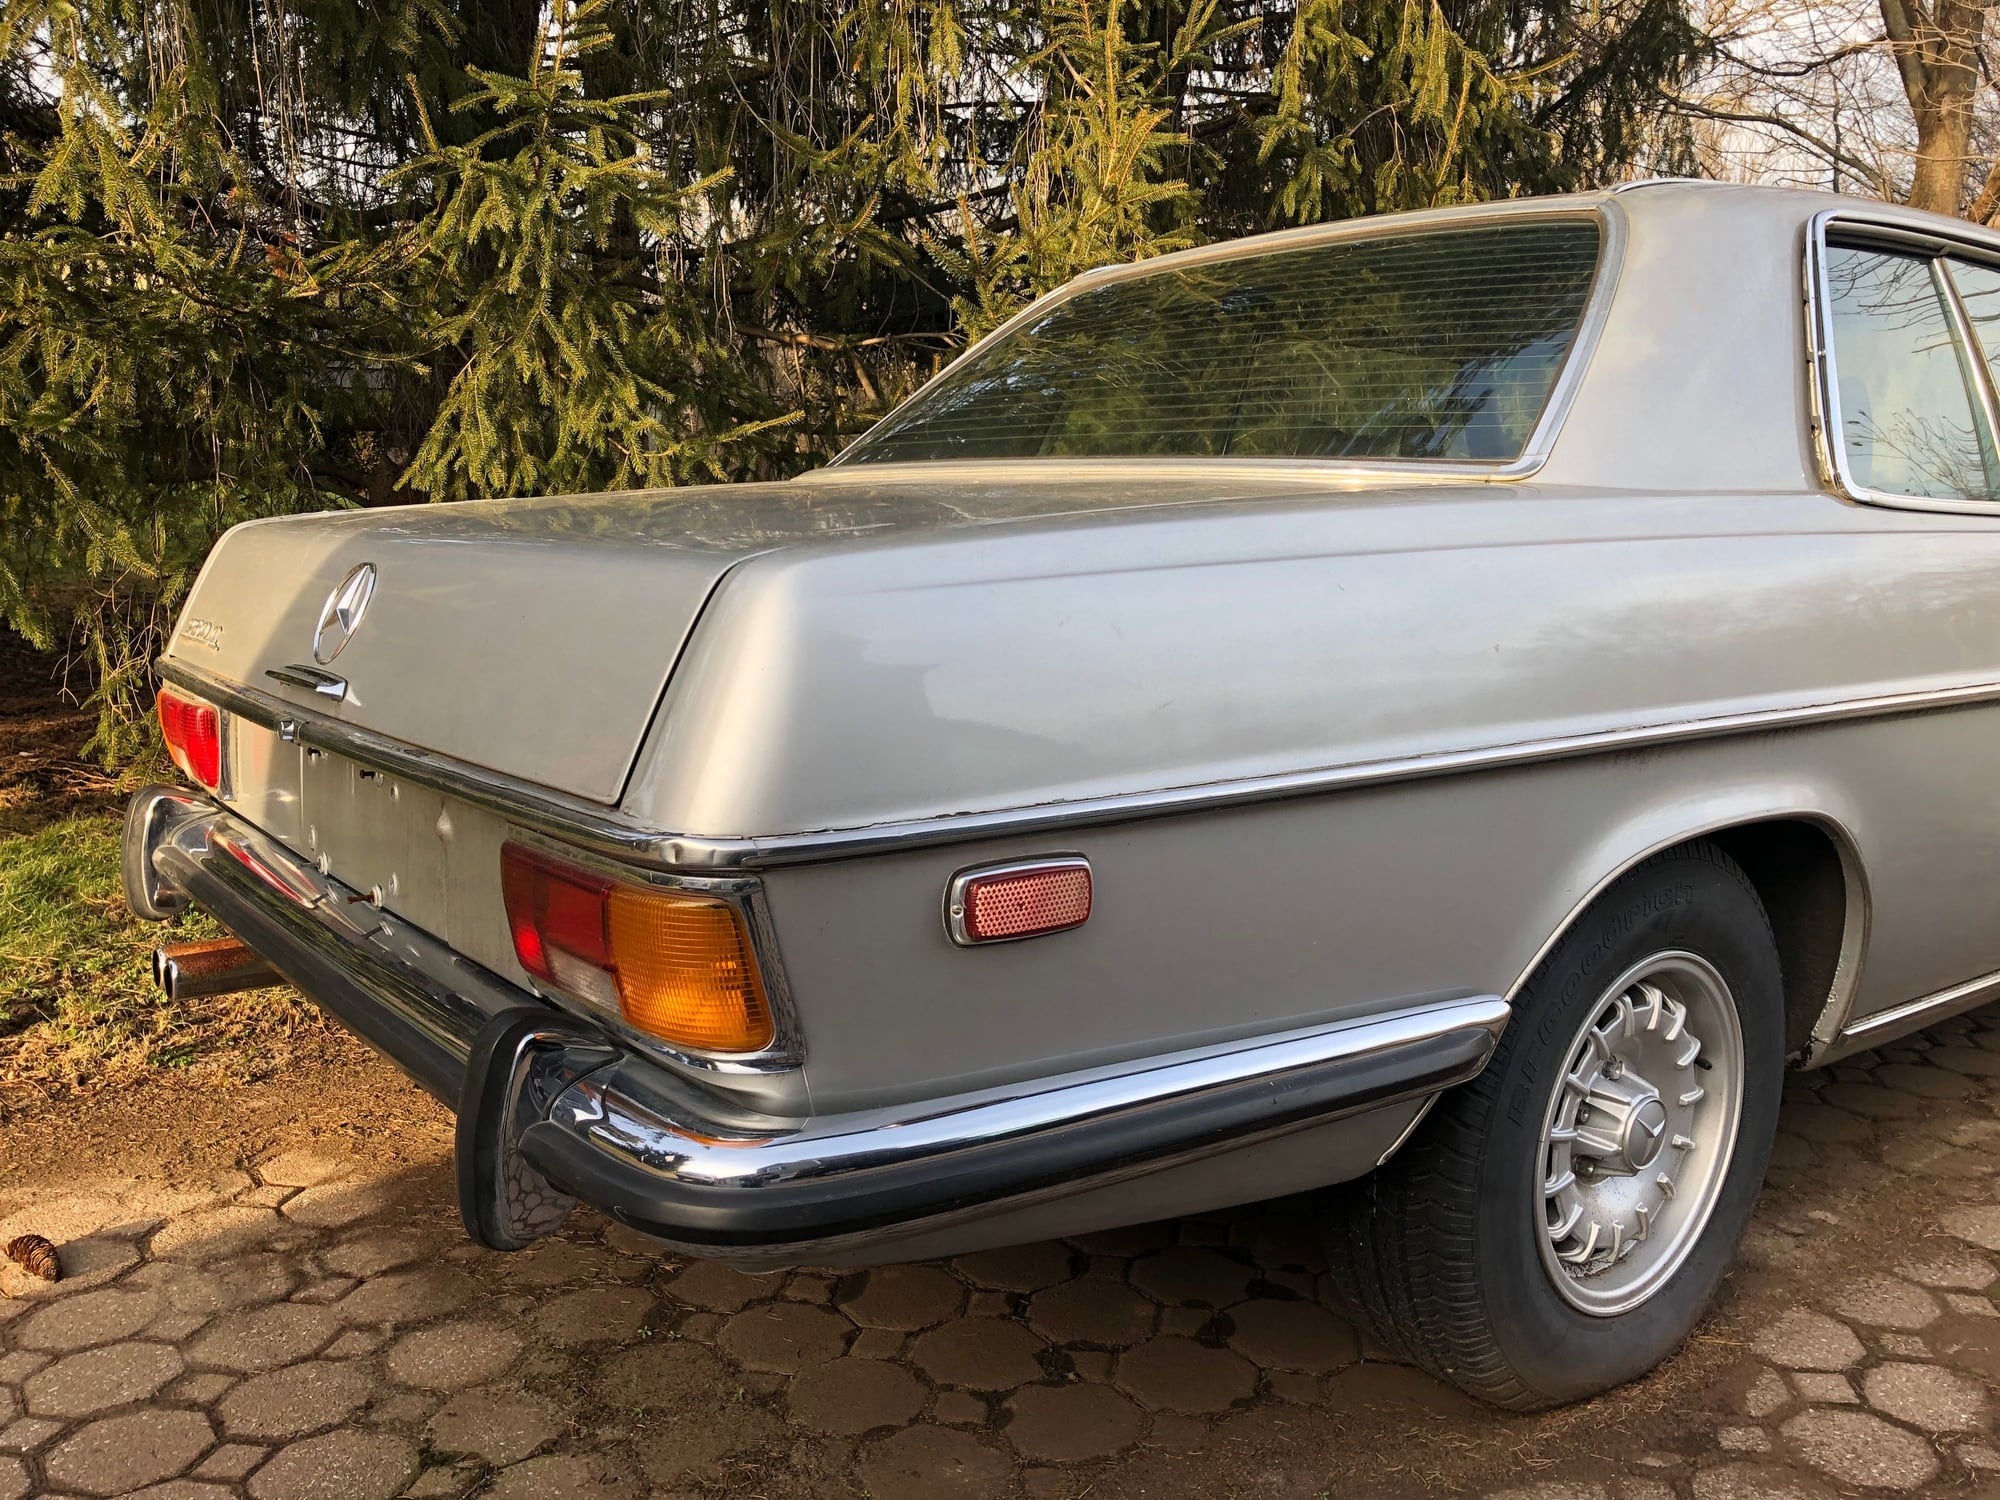 1972 Mercedes-Benz 250C - For Sale 1972 250C - Used - VIN 114.023-12-006619 - 68,000 Miles - 6 cyl - 2WD - Automatic - Coupe - Gray - Basking Ridge, NJ 07920, United States